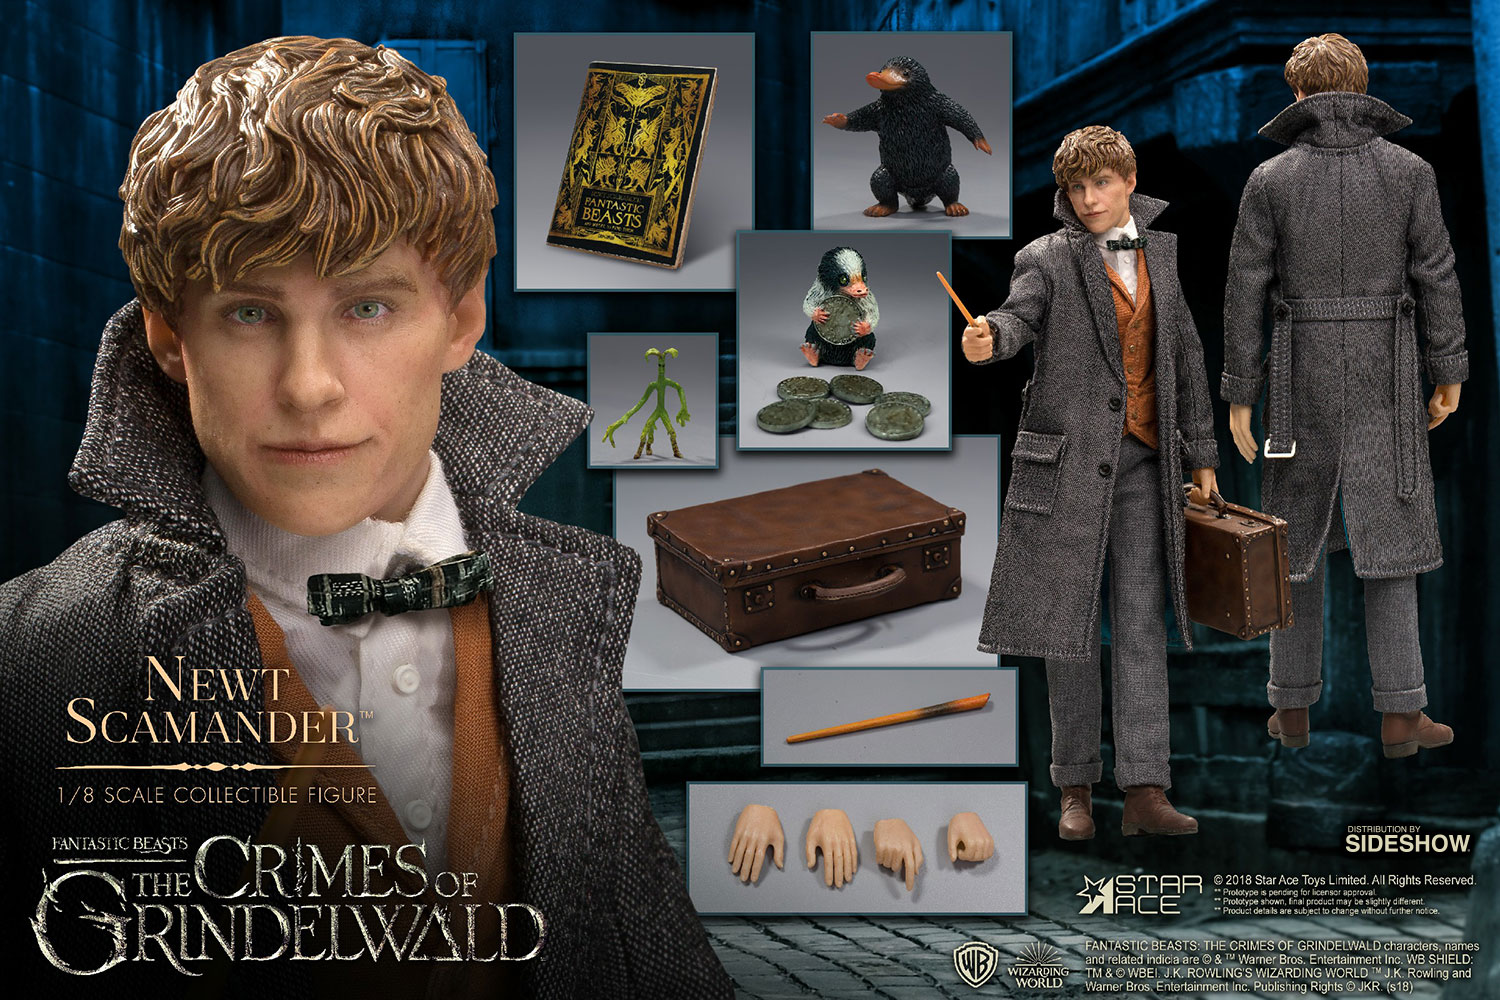 https://www.sideshowtoy.com/assets/products/904186-newt-scamander/lg/fantastic-beasts-the-crimes-of-grindelwald-newt-scamander-collectible-figure-star-ace-904186-01.jpg